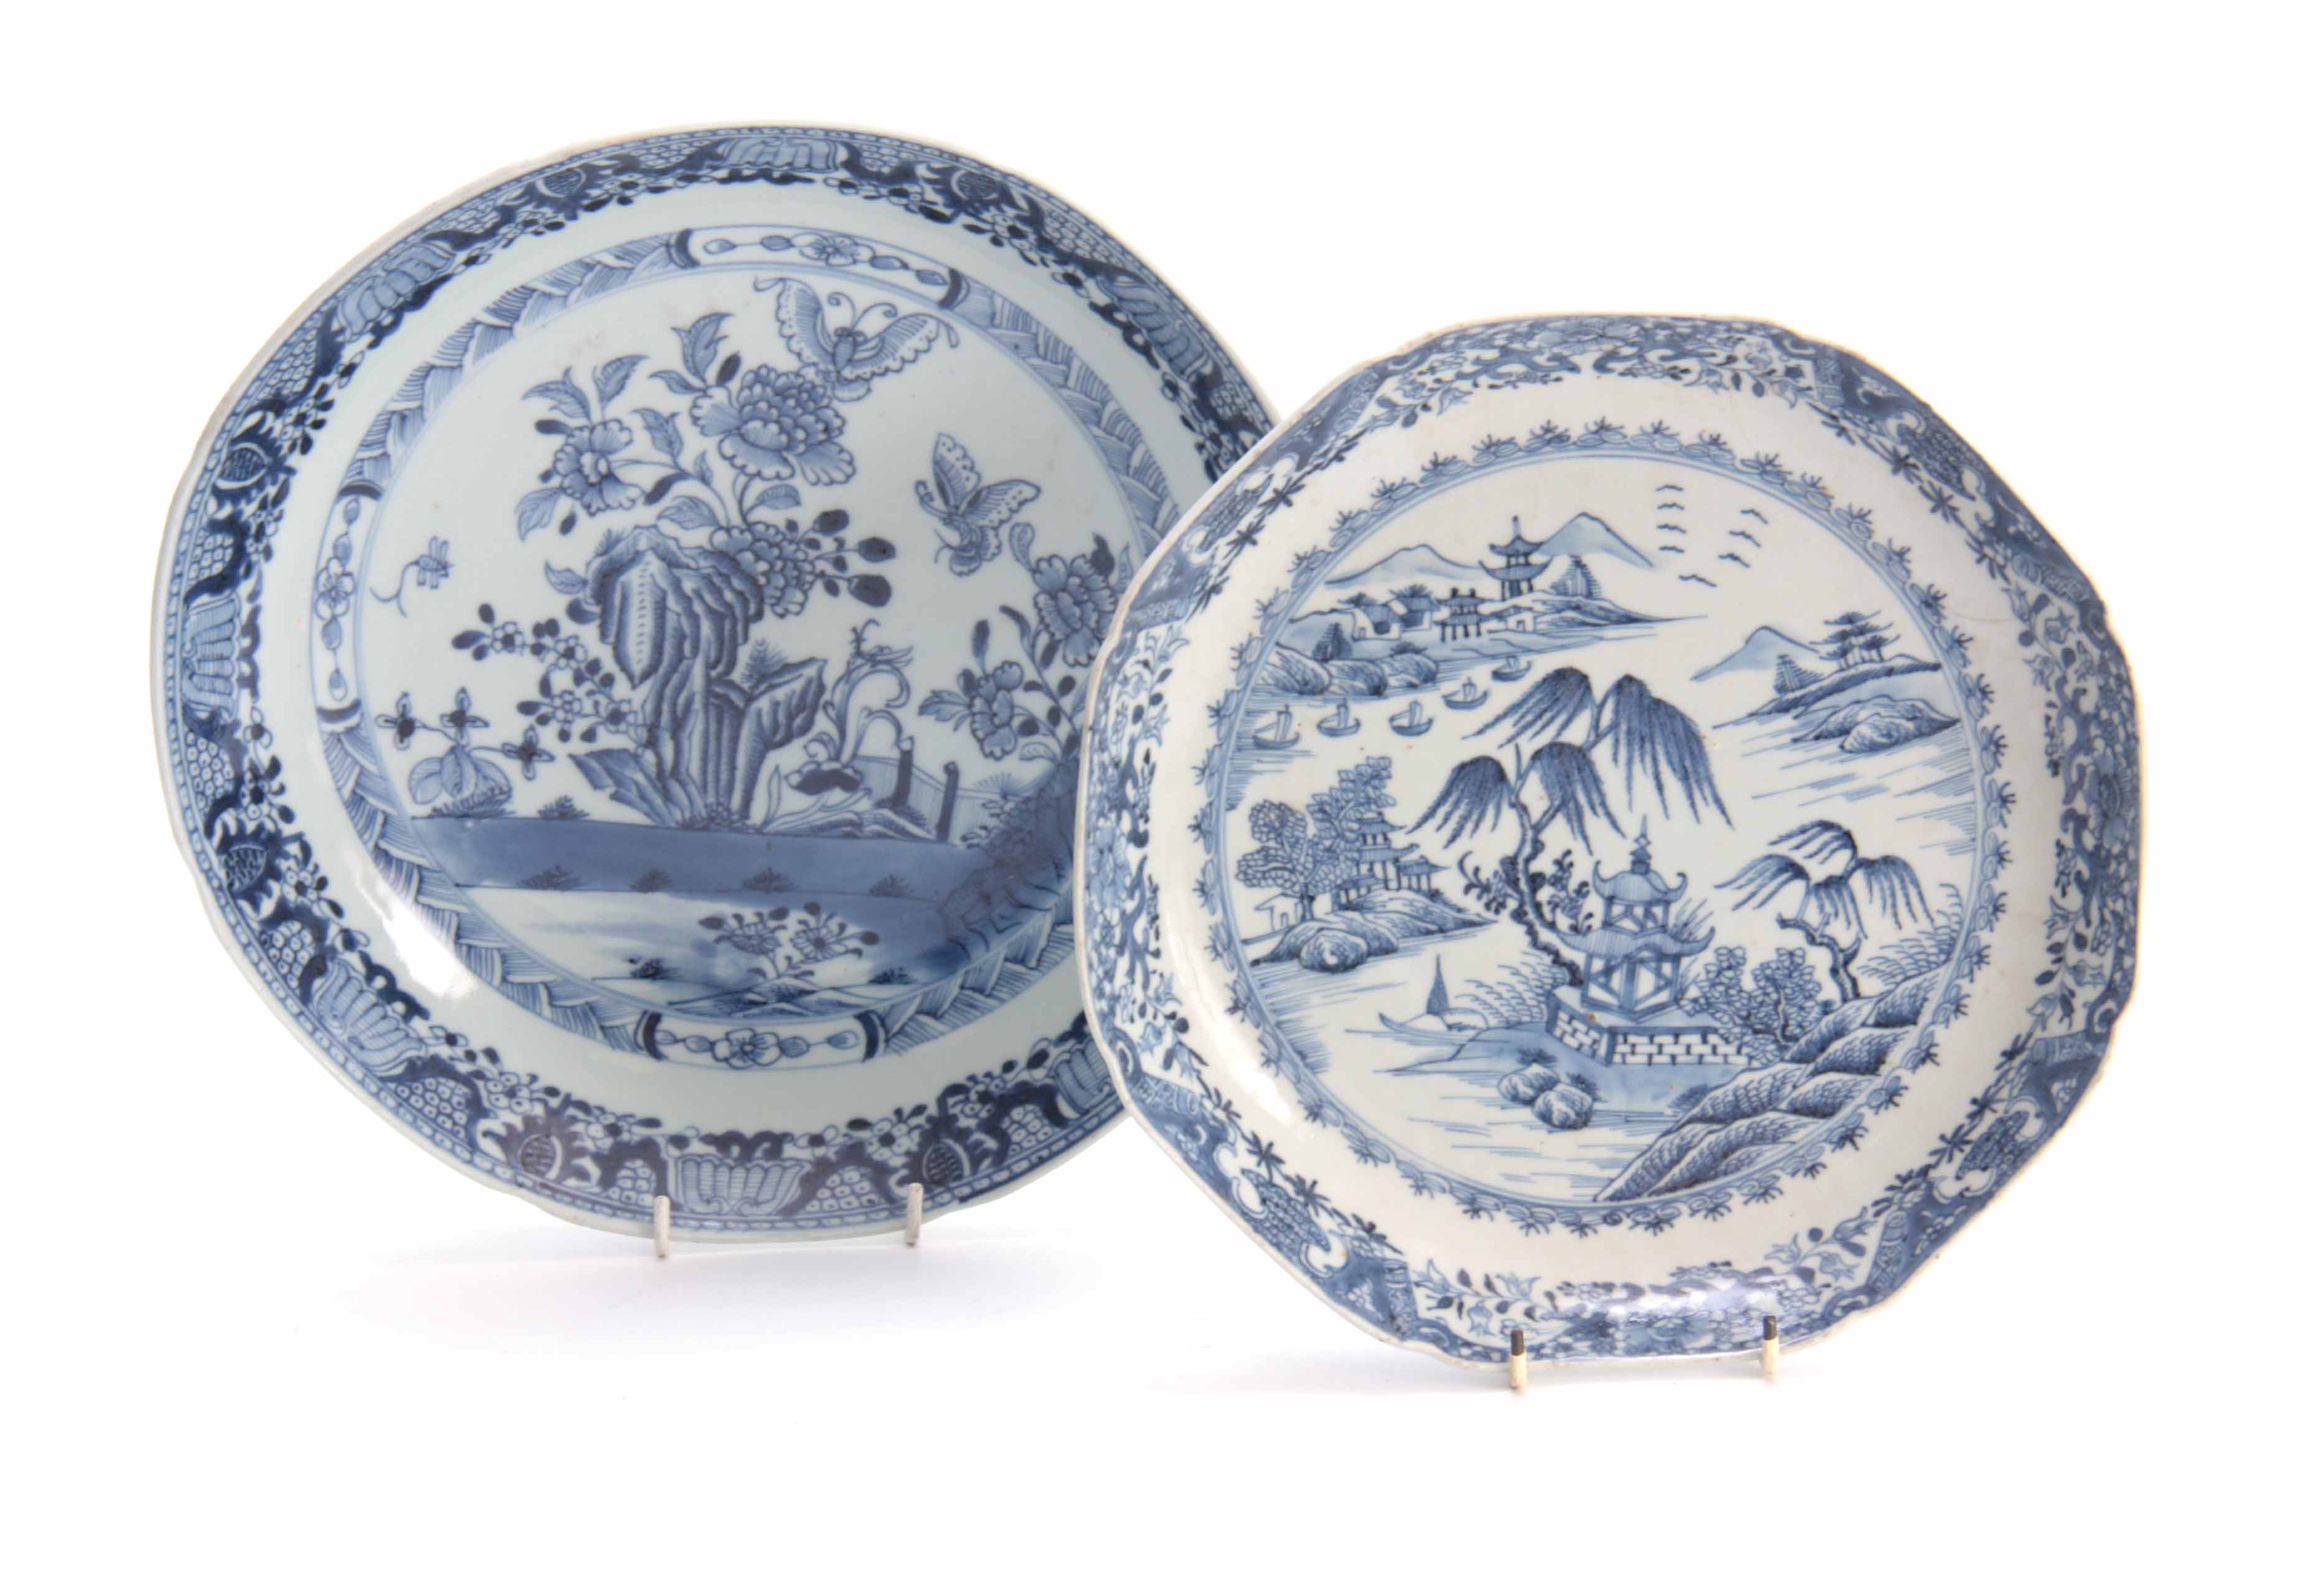 AN 18TH CENTURY CHINESE BLUE AND WHITE SHALLOW DISH with fenced garden scene and butterfly centre